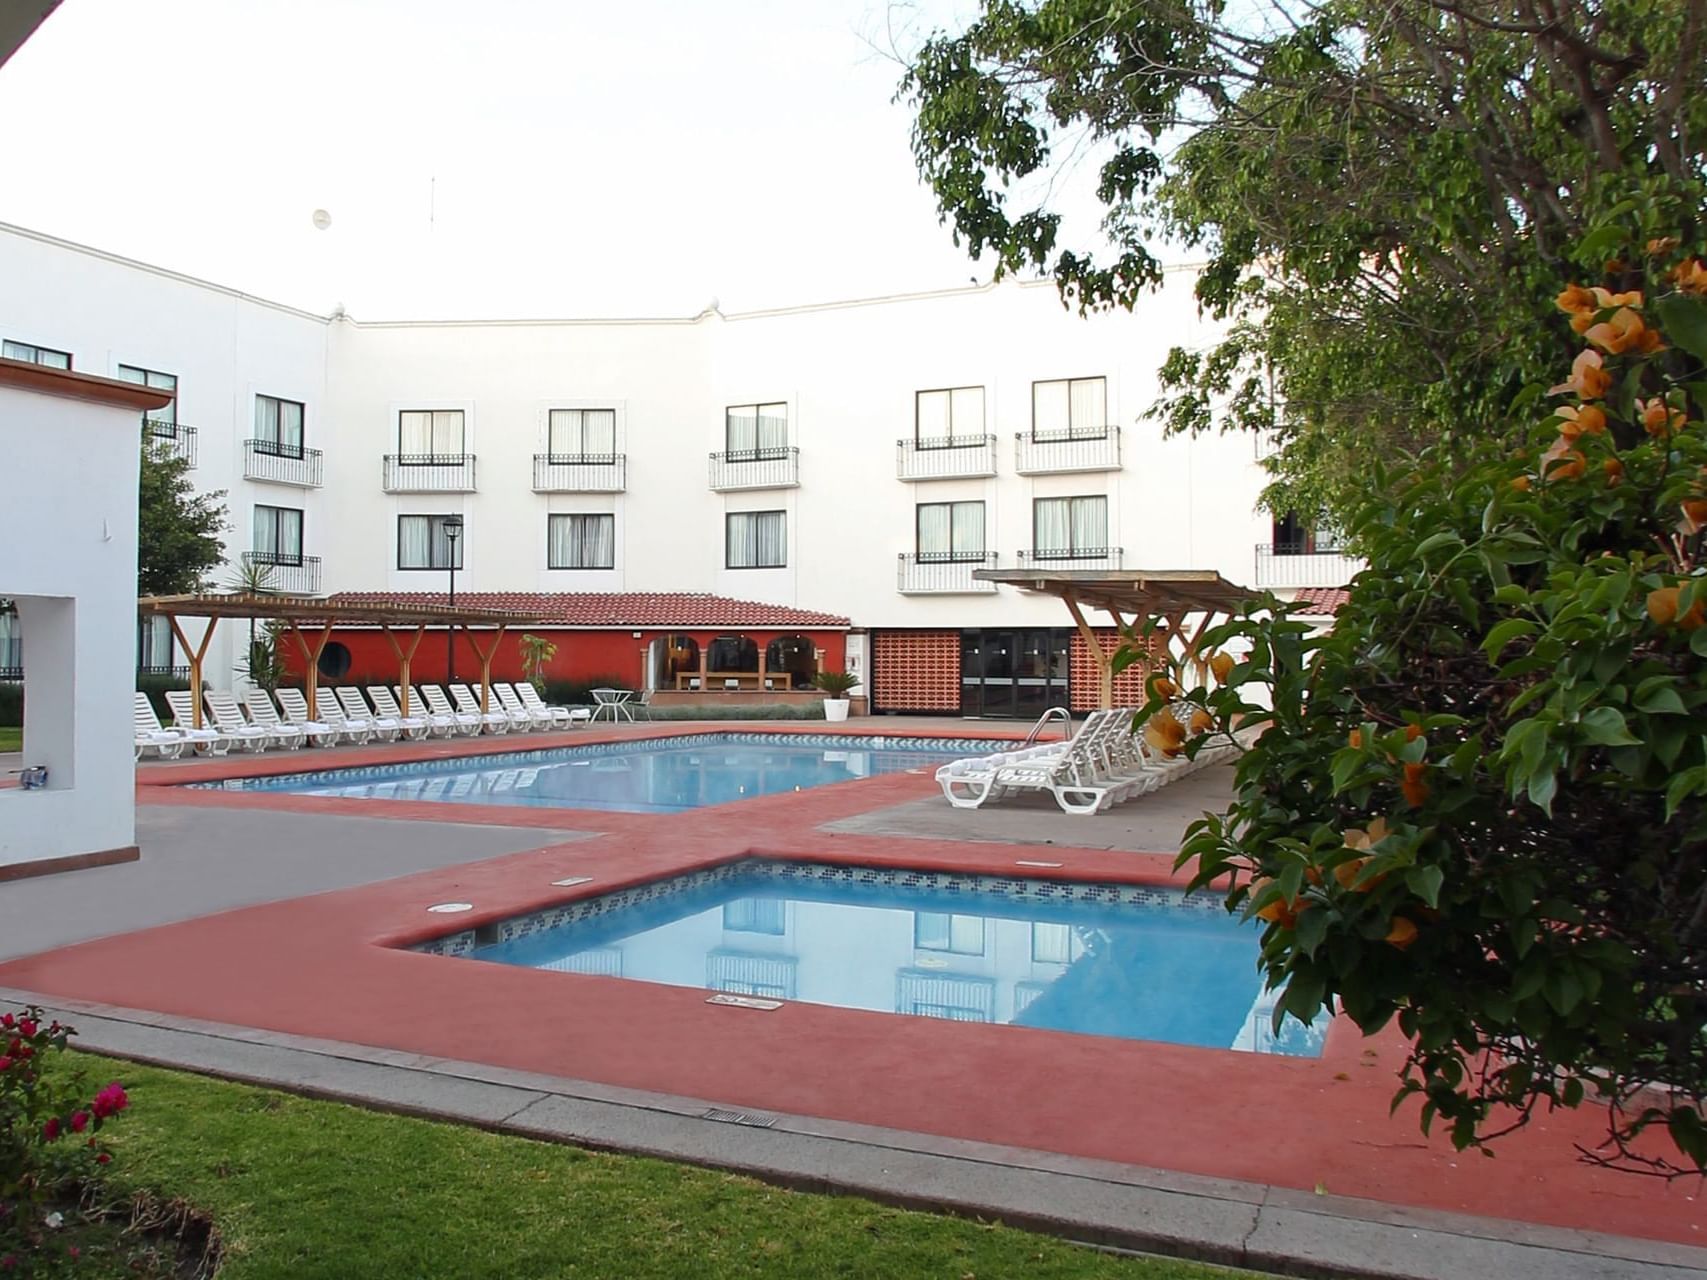 Pool beds around the Outdoor swimming pool Fiesta Inn Hotels